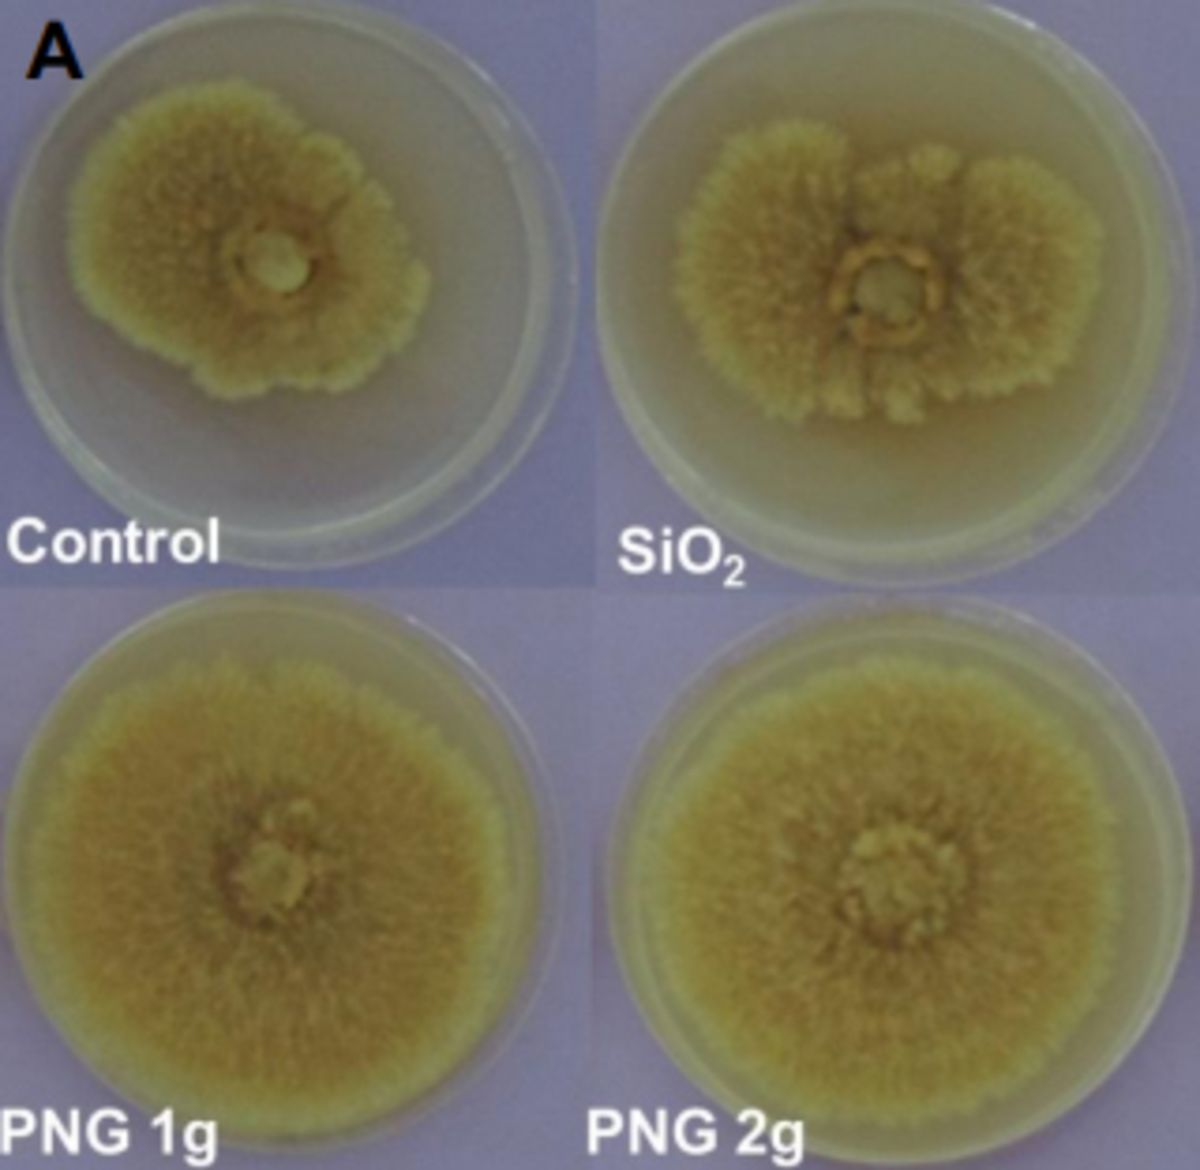 comparison im mycorrhization: Control (no treatment), SiO2 (Sikron- carrier material), PNG 1g (Penergetic 1g), PNG 2g (Penergetic 2g) 